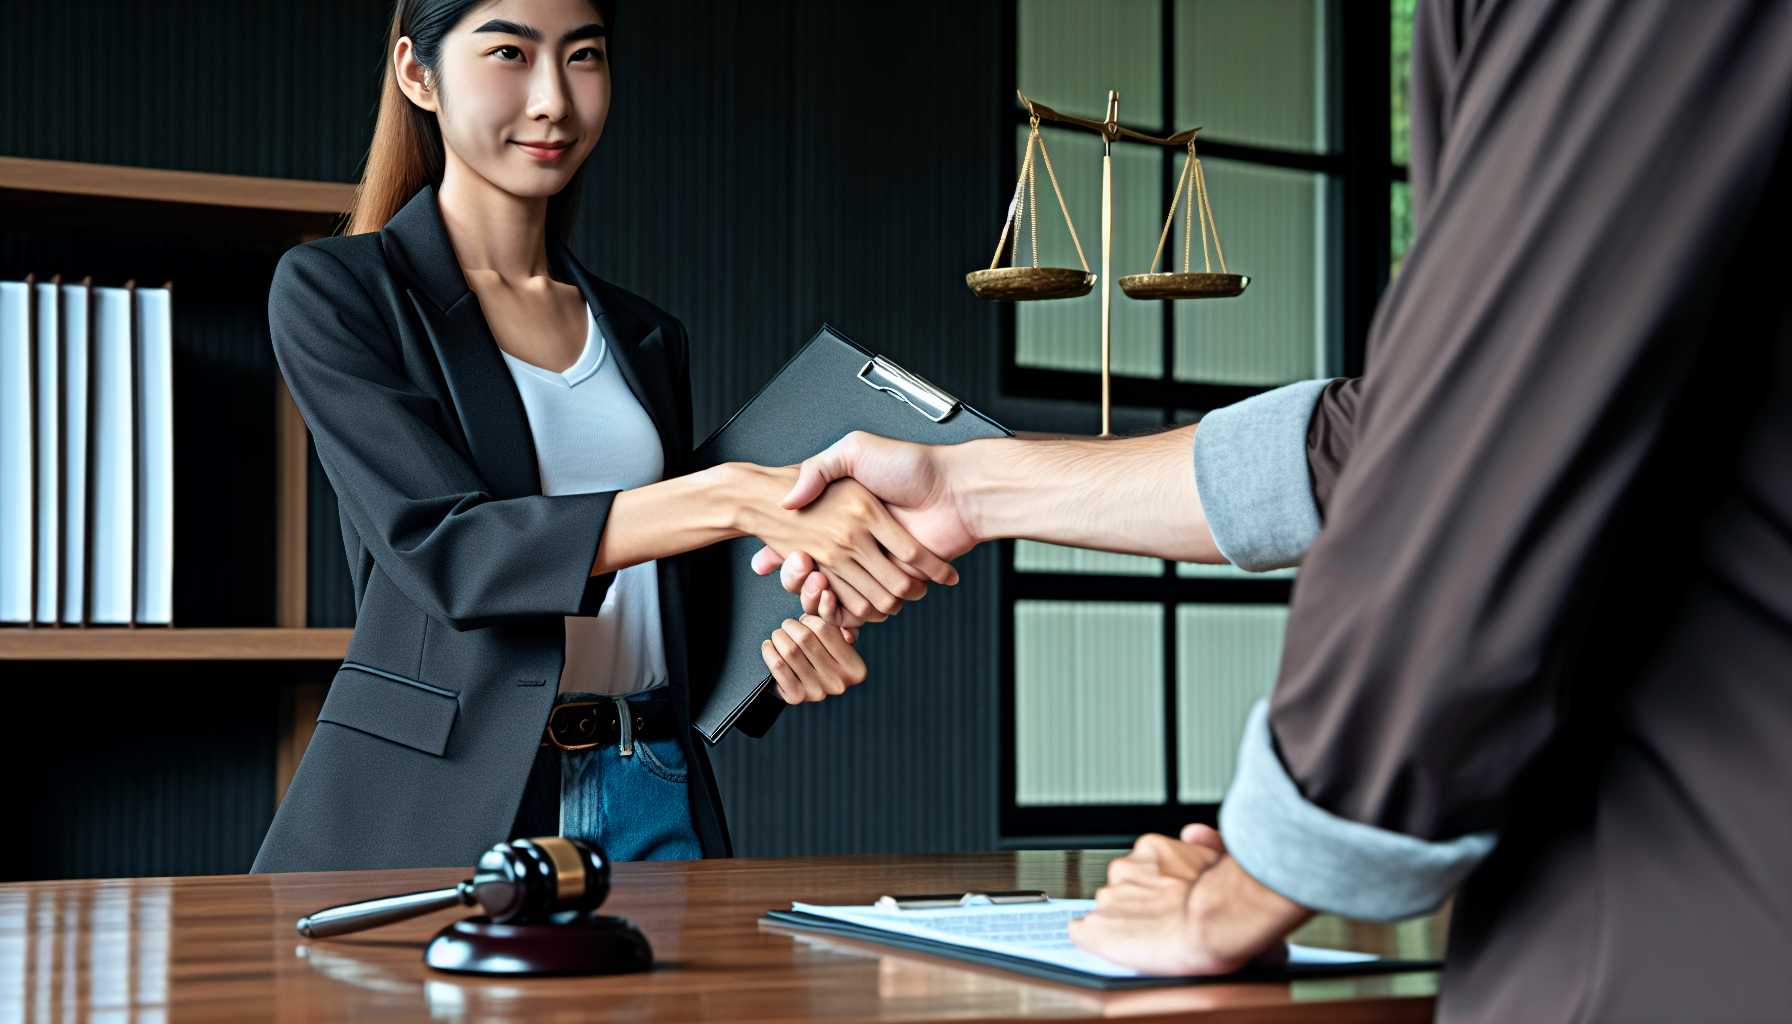 An illustration depicting a handshake to symbolize the contingency fee model in personal injury cases.